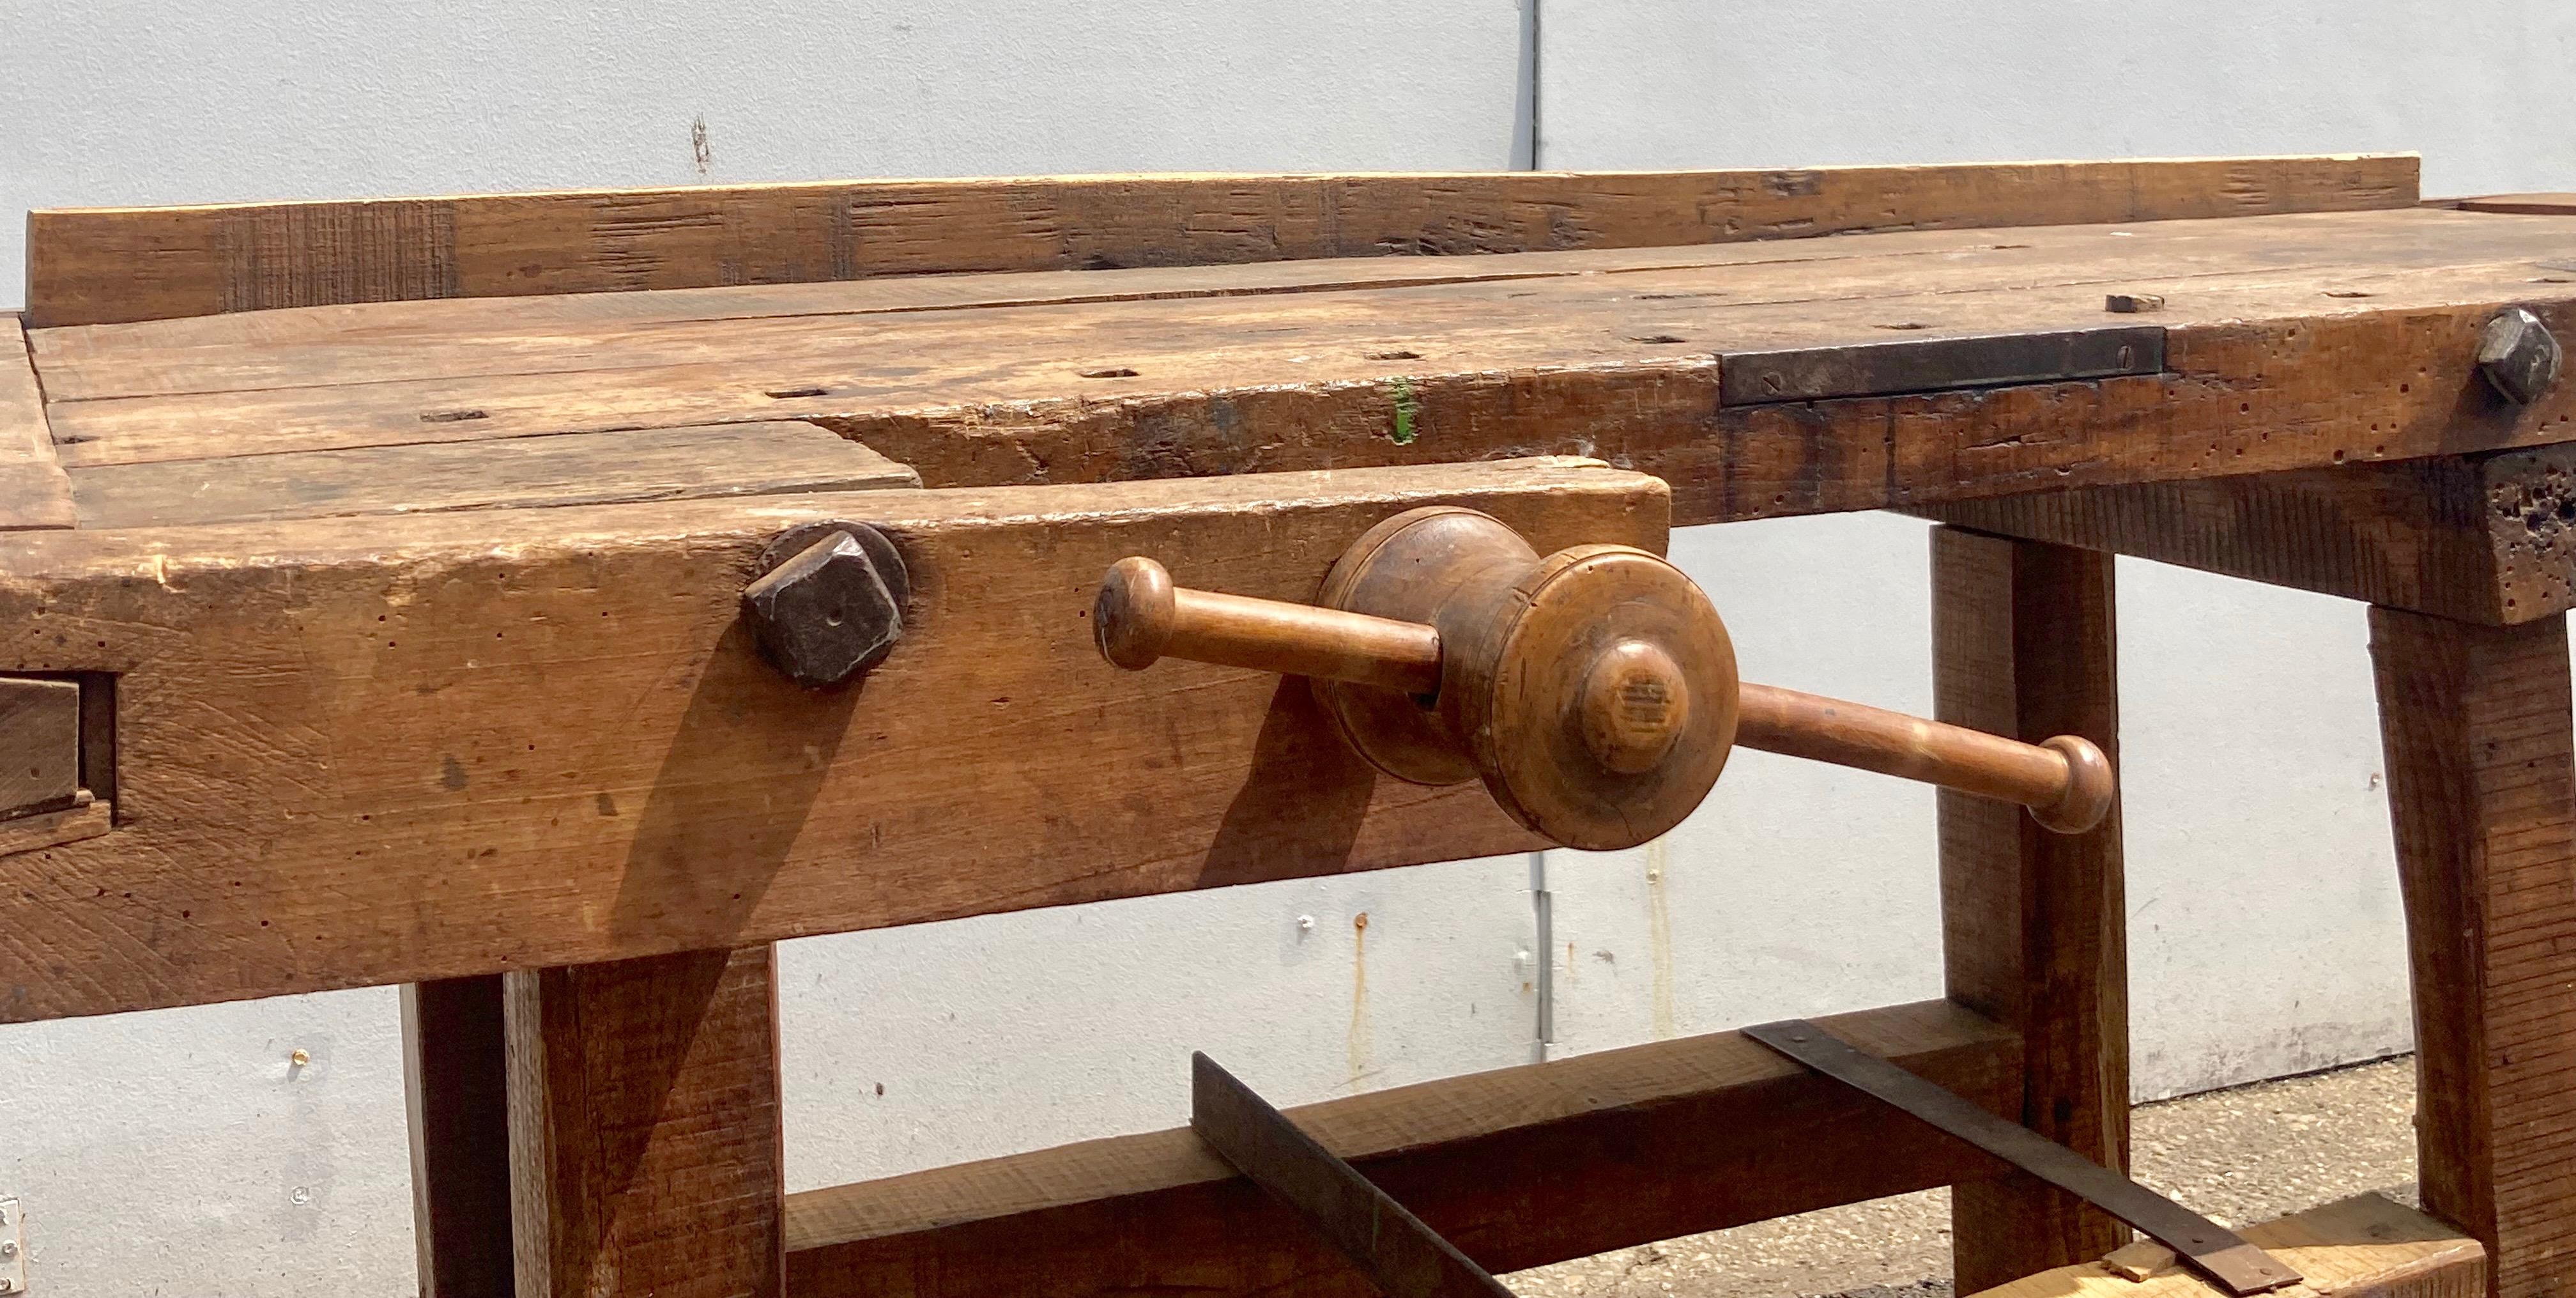 This beautifully naturally distressed carpenter’s workbench is unusual in that its base, made entirely of oak, is joined together in one piece.  Such benches usually have knock-down trestle-style bases.  It is a little harder to transport and